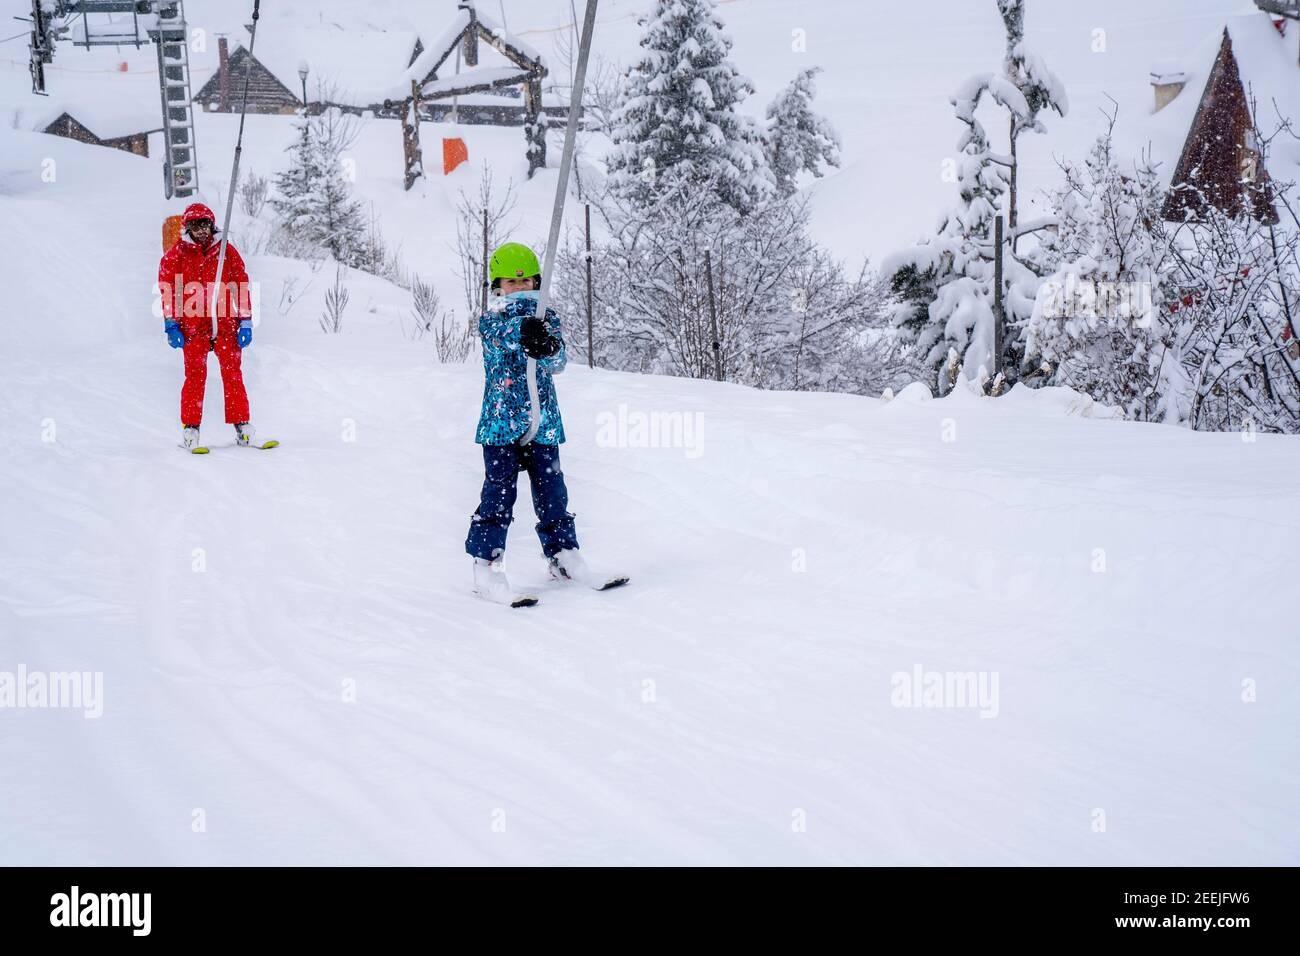 AURON, FRANCE-01.01.2021: Professional ski instructor and child lifting on the ski drag lift rope to the mountain during snowfall. Family and children active vacation concept. Blurred focus background Stock Photo